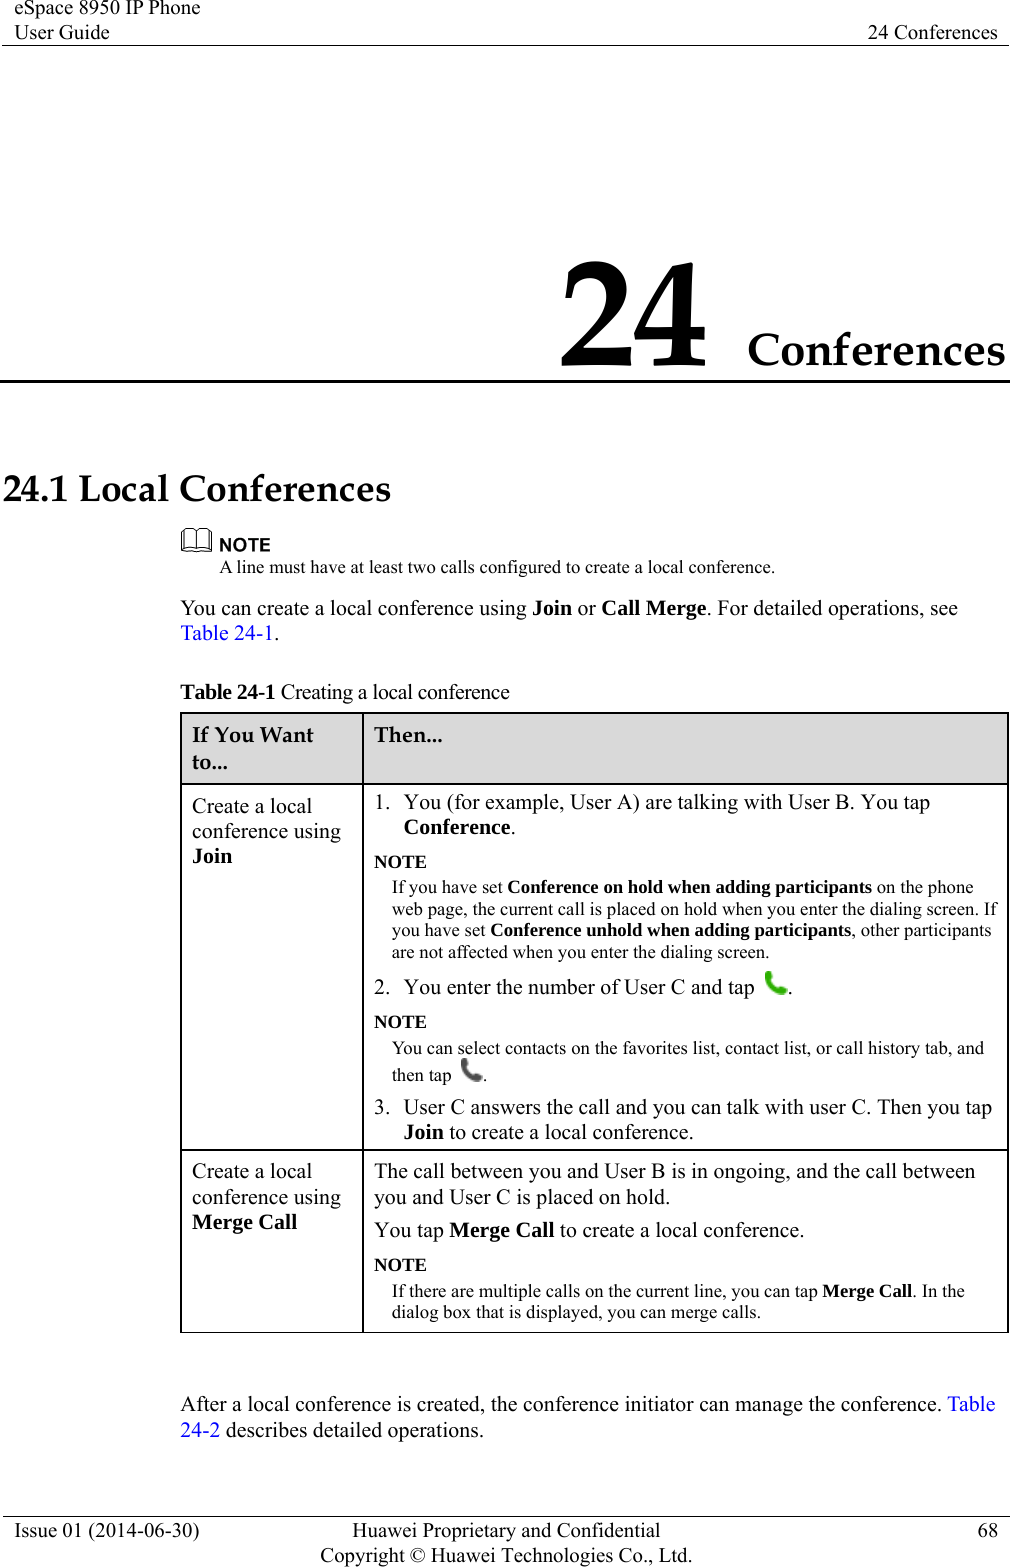 eSpace 8950 IP Phone User Guide  24 Conferences Issue 01 (2014-06-30)  Huawei Proprietary and Confidential         Copyright © Huawei Technologies Co., Ltd.68 24 Conferences 24.1 Local Conferences  A line must have at least two calls configured to create a local conference. You can create a local conference using Join or Call Merge. For detailed operations, see Table 24-1. Table 24-1 Creating a local conference If You Want to... Then... Create a local conference using Join 1. You (for example, User A) are talking with User B. You tap Conference. NOTE If you have set Conference on hold when adding participants on the phone web page, the current call is placed on hold when you enter the dialing screen. If you have set Conference unhold when adding participants, other participants are not affected when you enter the dialing screen. 2. You enter the number of User C and tap  . NOTE You can select contacts on the favorites list, contact list, or call history tab, and then tap  . 3. User C answers the call and you can talk with user C. Then you tap Join to create a local conference. Create a local conference using Merge Call The call between you and User B is in ongoing, and the call between you and User C is placed on hold. You tap Merge Call to create a local conference. NOTE If there are multiple calls on the current line, you can tap Merge Call. In the dialog box that is displayed, you can merge calls.  After a local conference is created, the conference initiator can manage the conference. Table 24-2 describes detailed operations. 